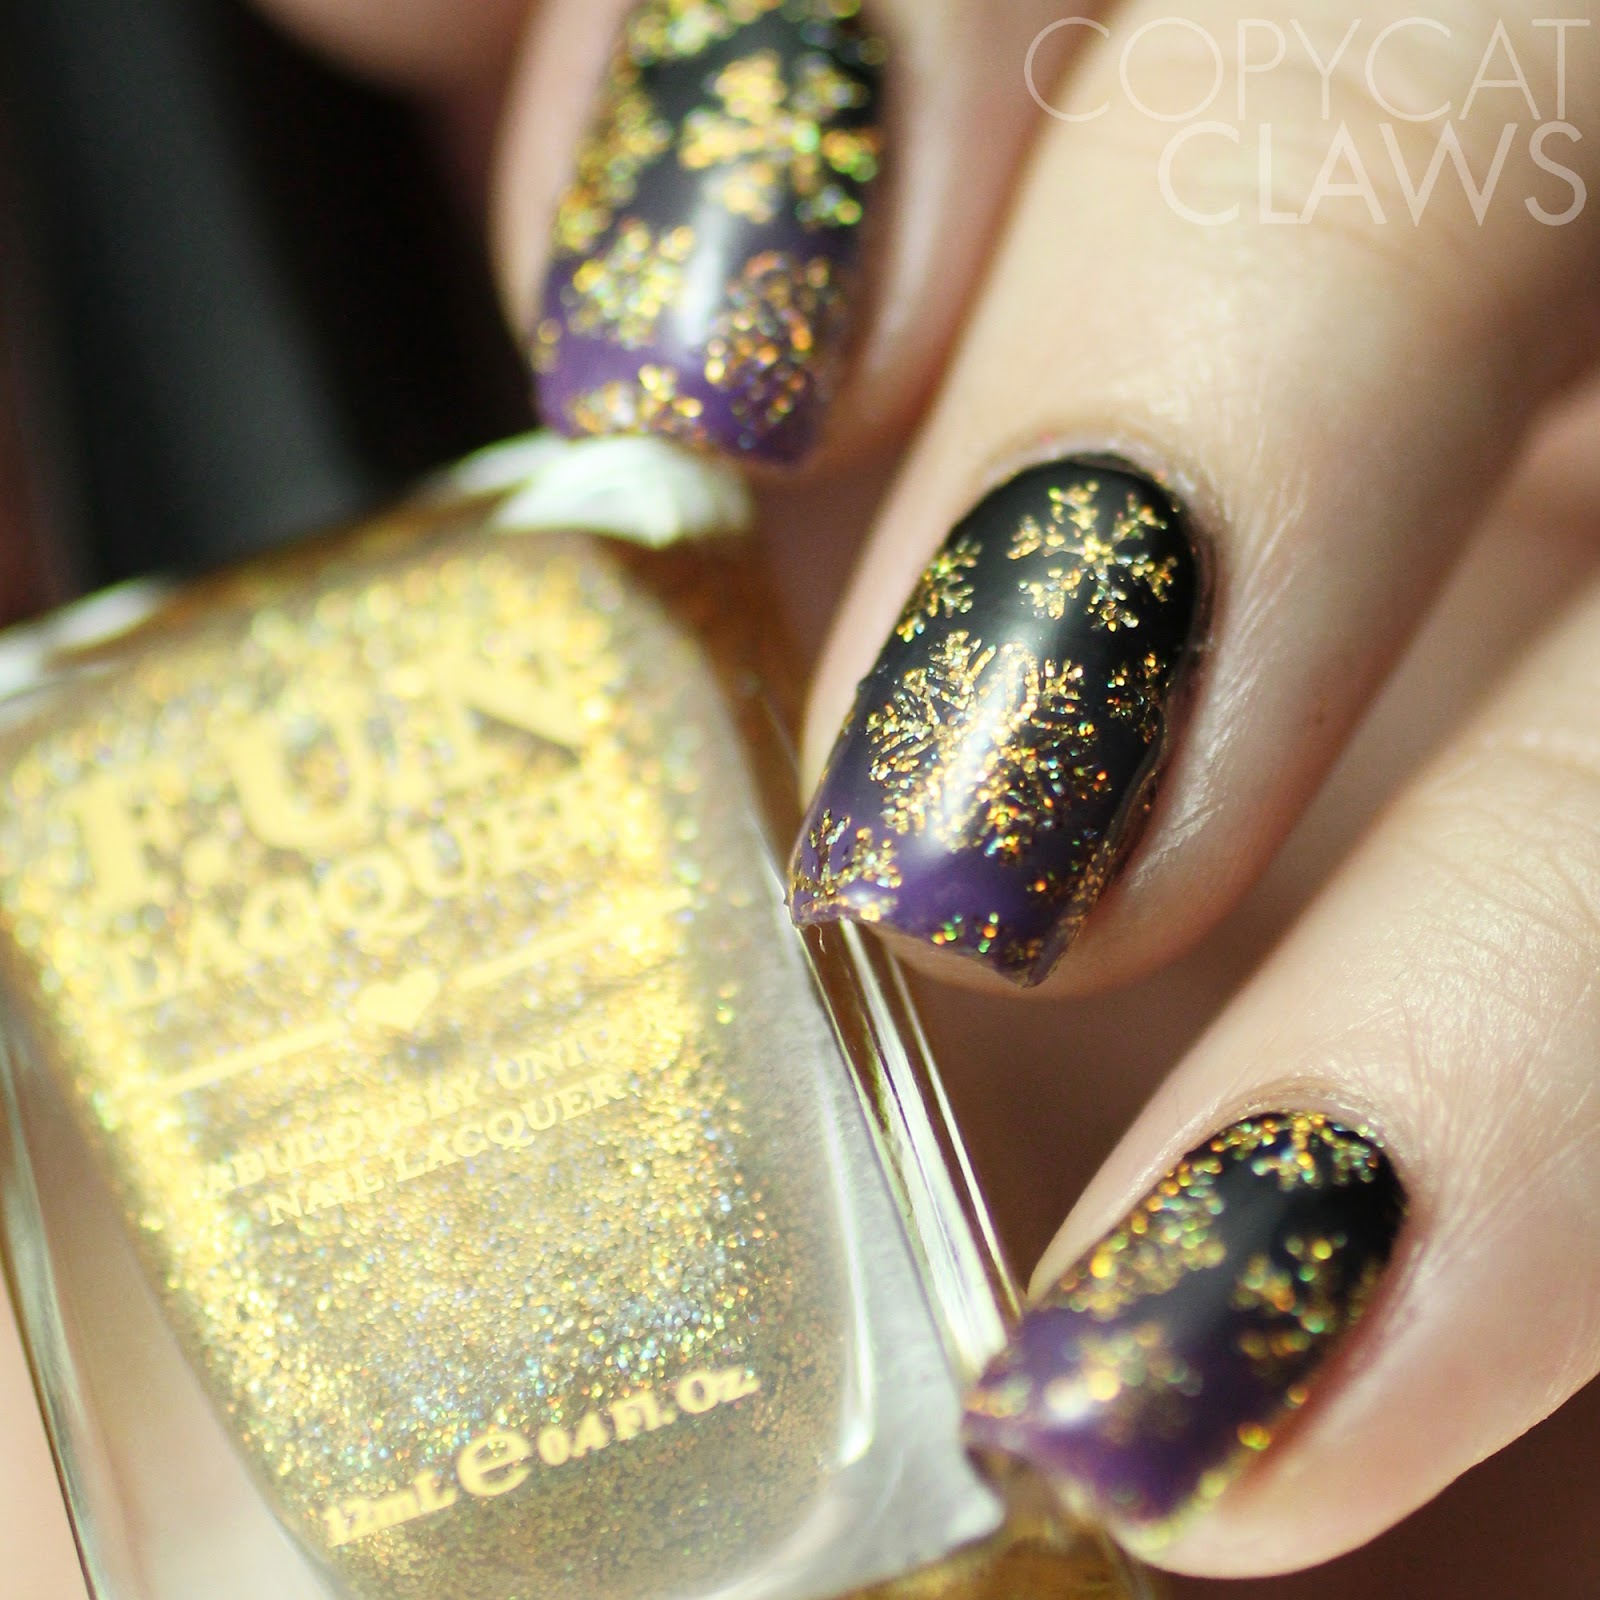 Copycat Claws: The Digit-al Dozen does All That Glitters/Nail Crazies ...